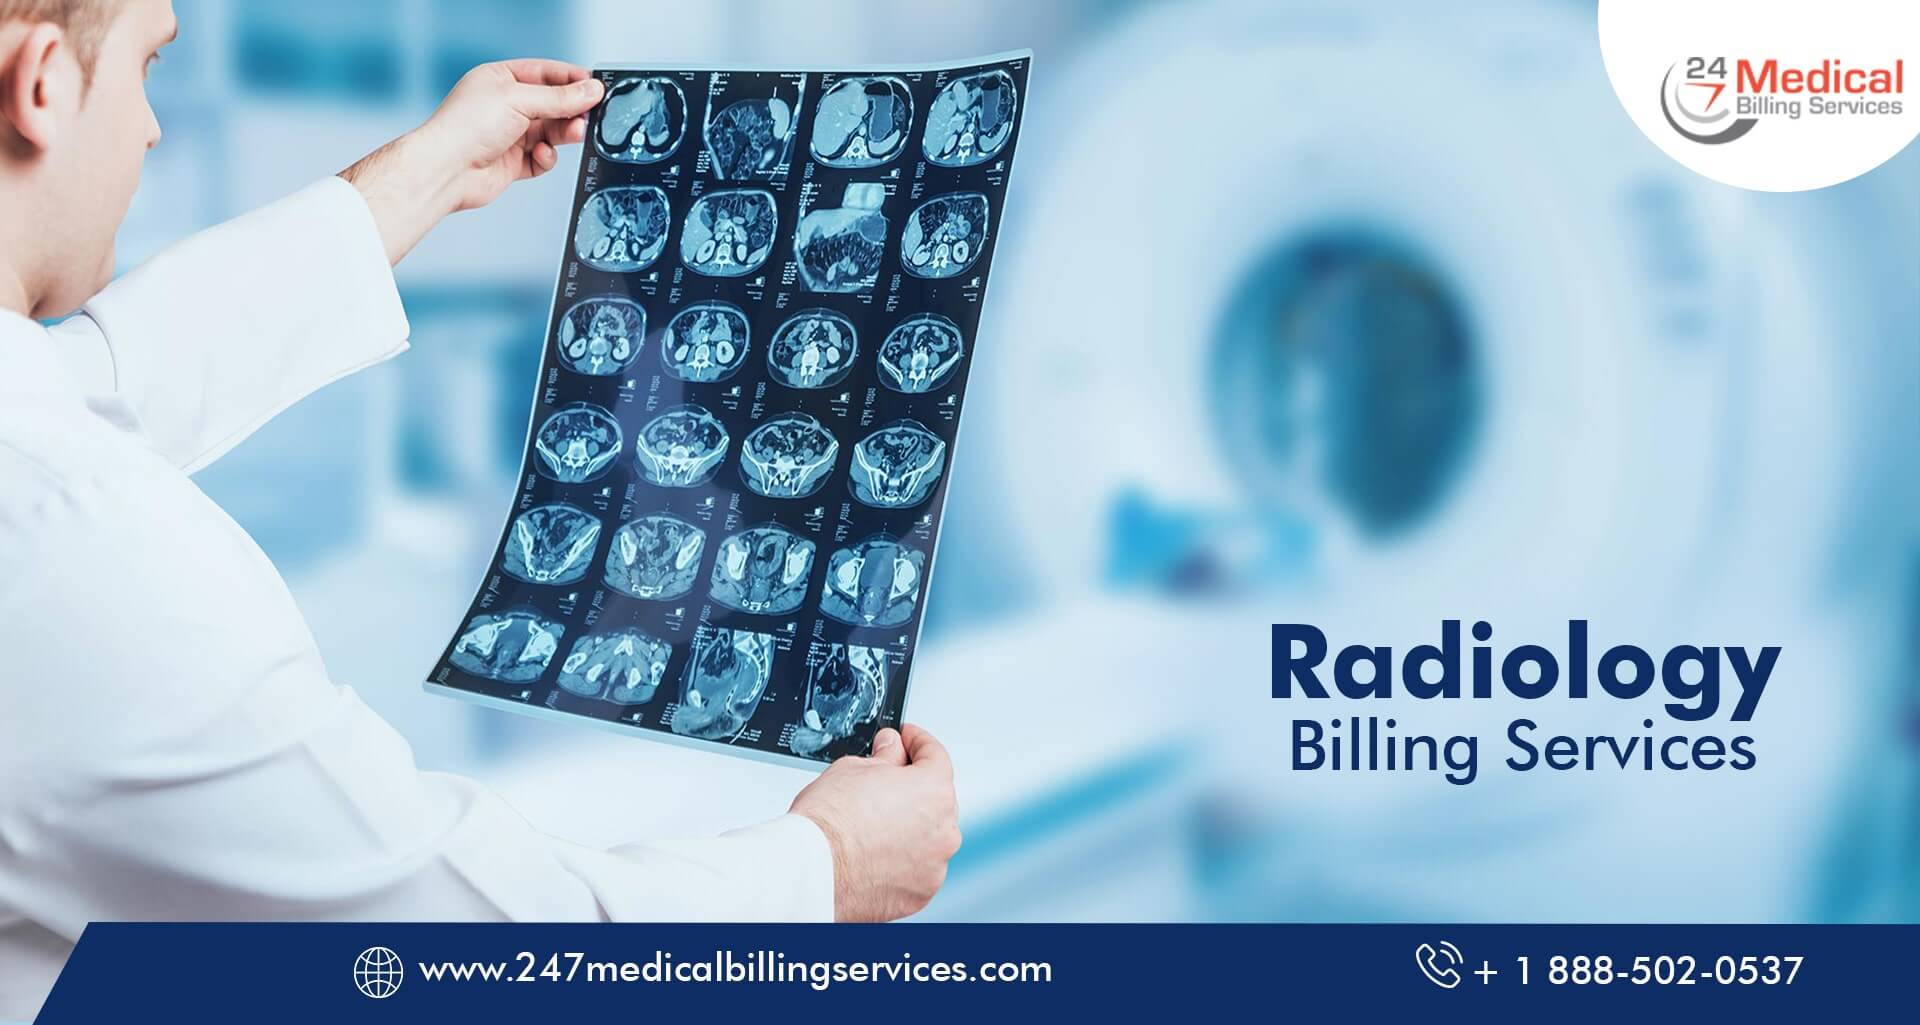  Radiology Billing Services in Los Angeles, California (CA)